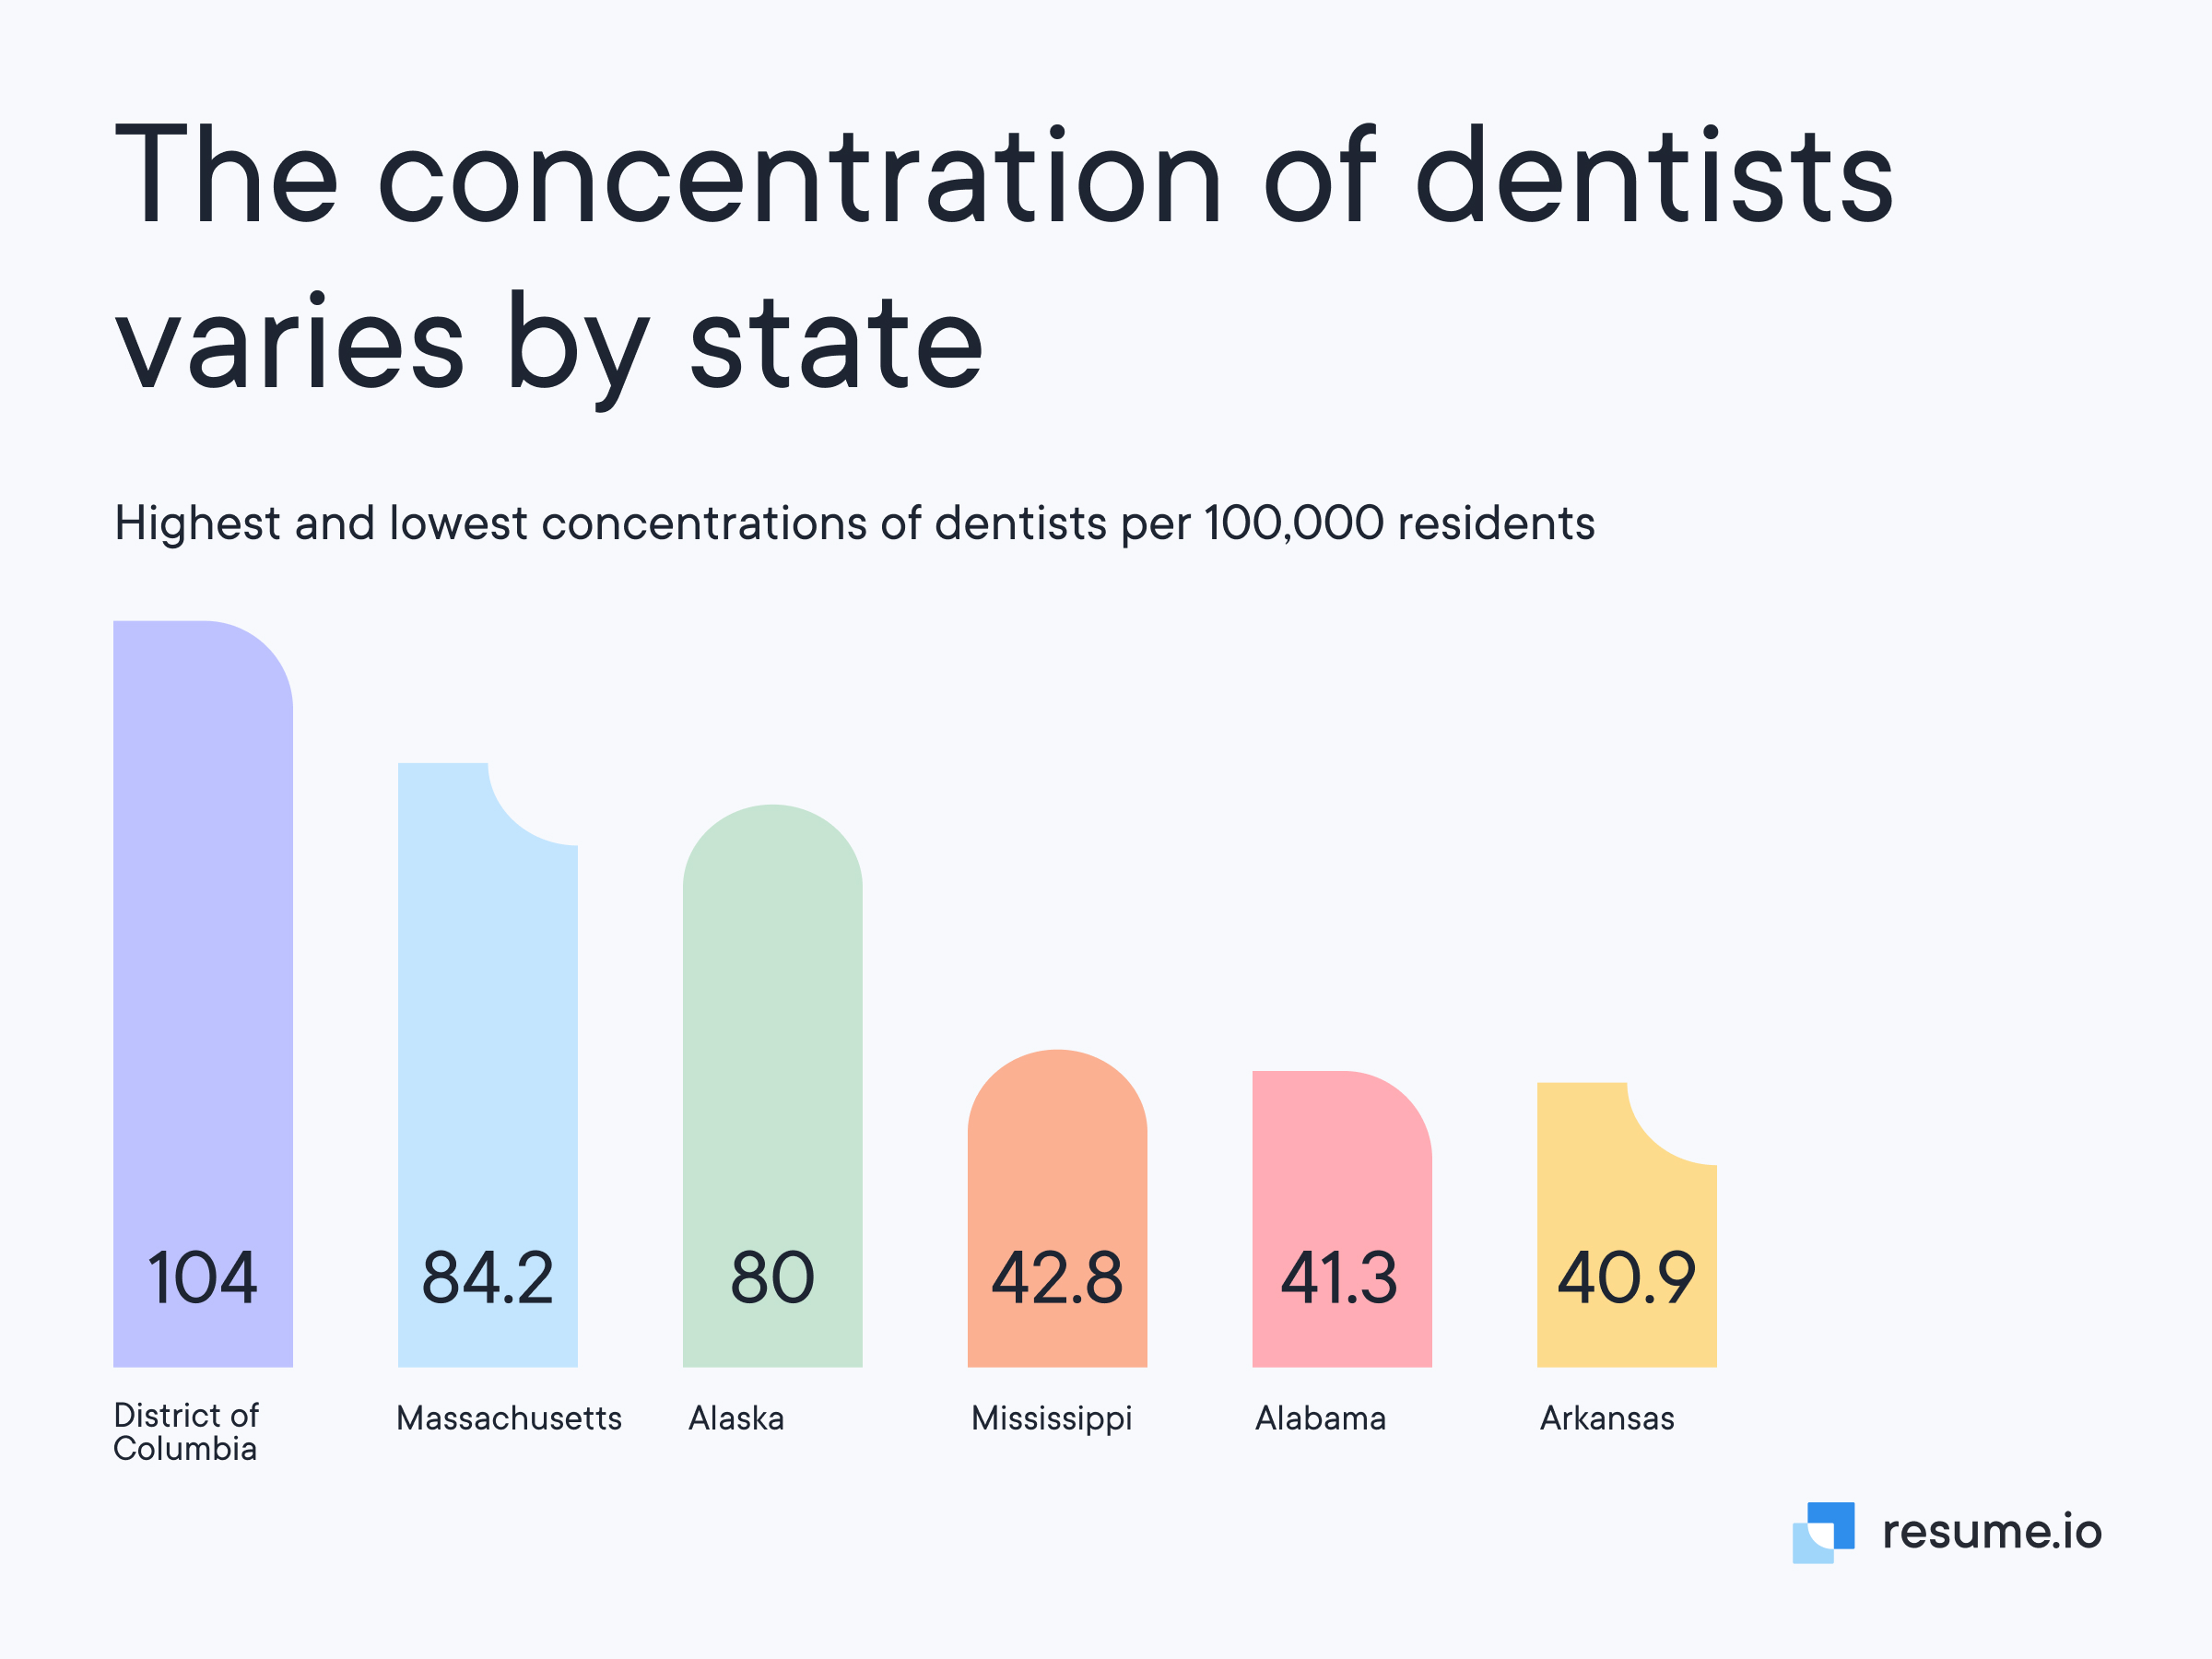 District of Columbia has the most concentration of dentists, 104000. Arkansas has 40900 dentists. 